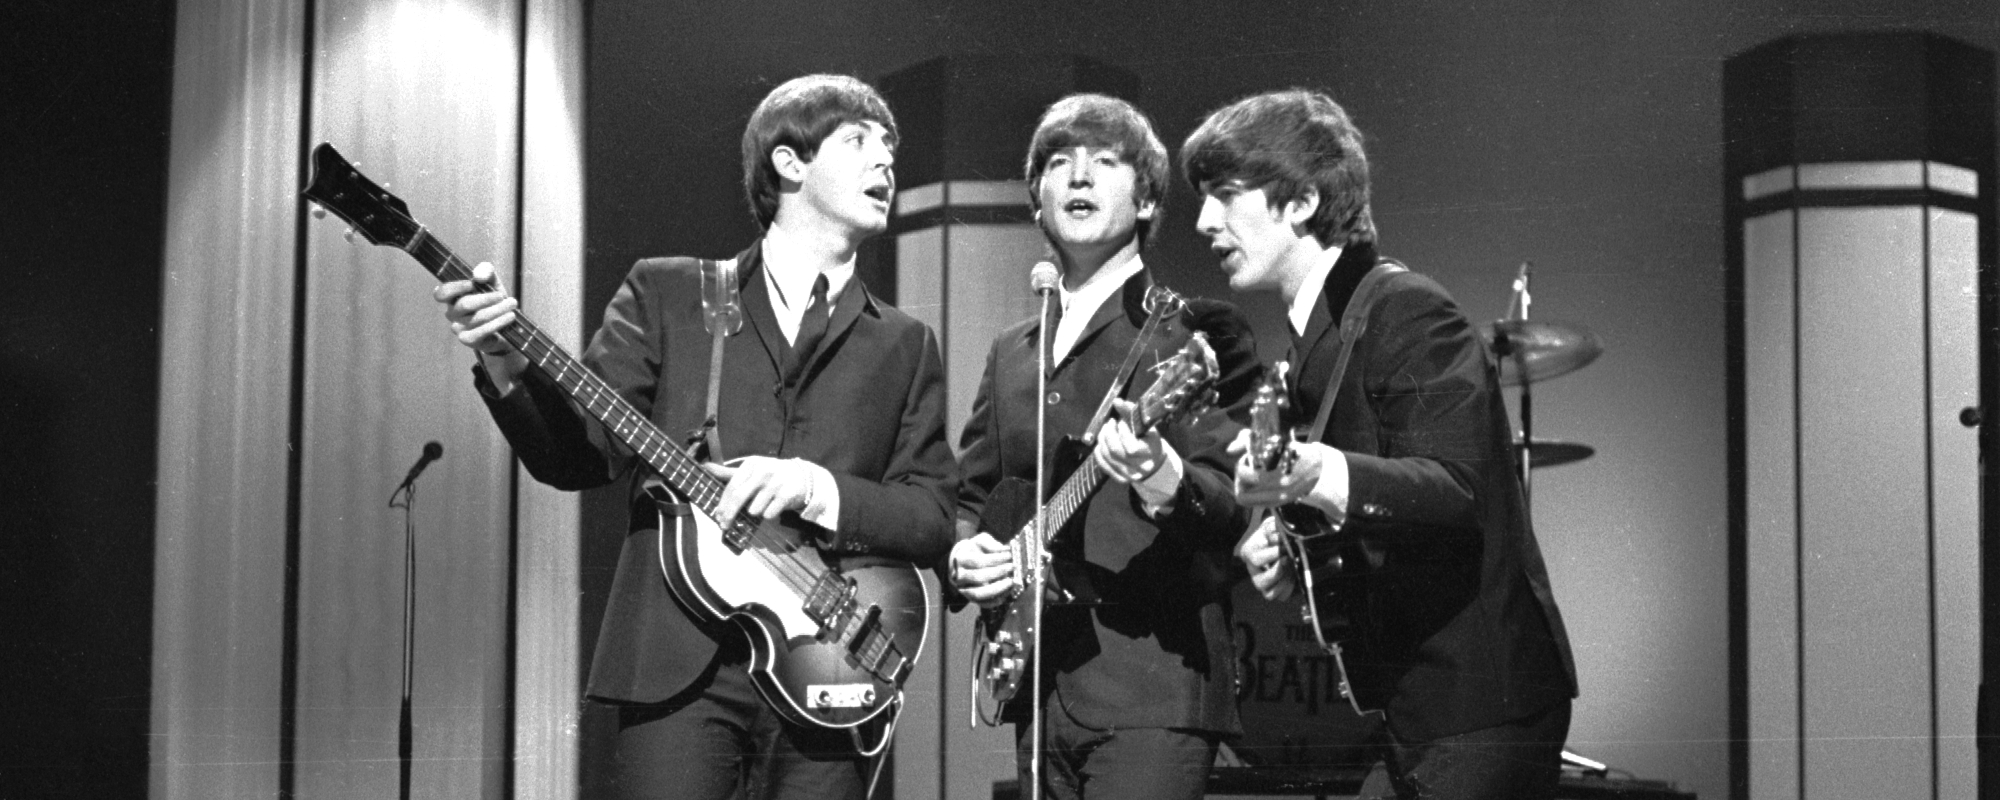 The Story Behind “From Me to You” by The Beatles and How It Was Inspired by a Letter in the ‘NME’